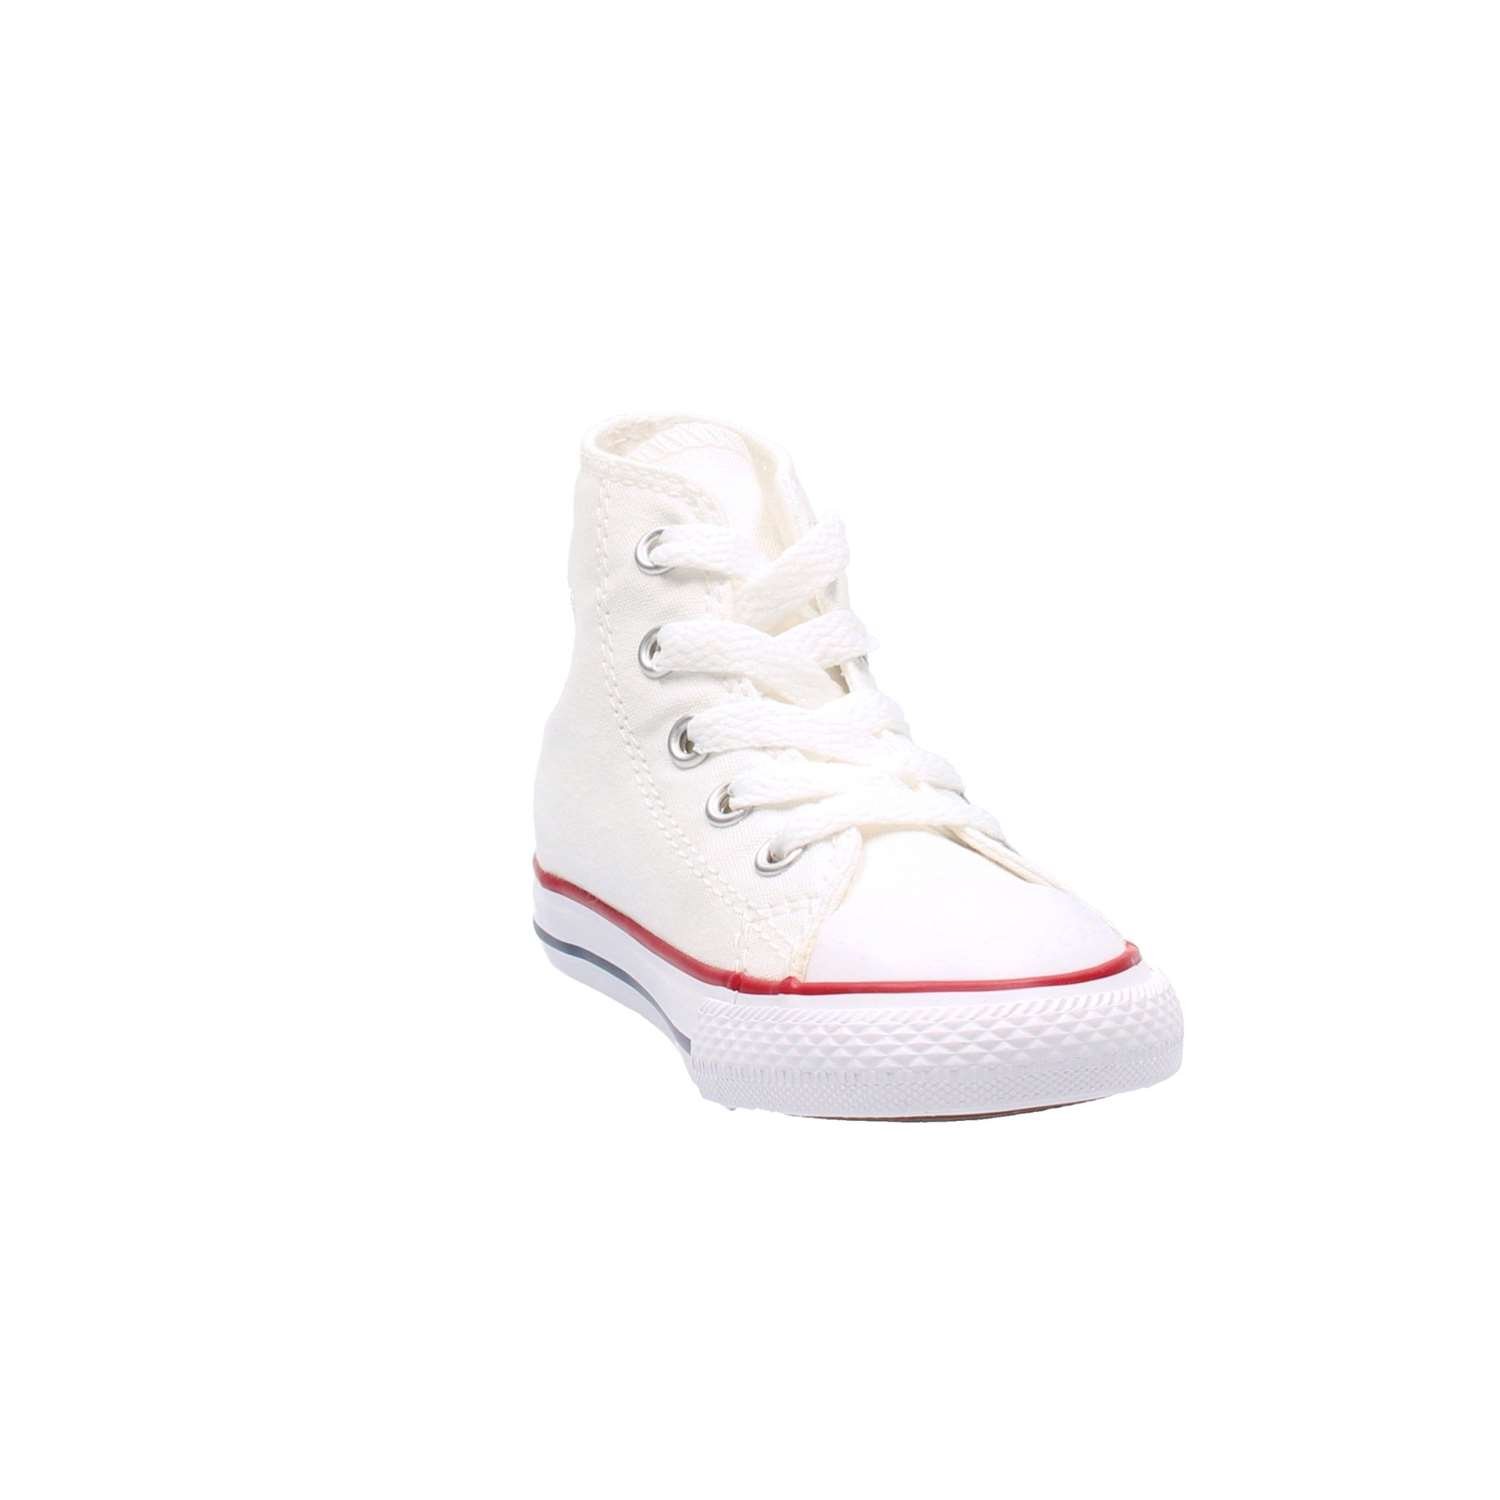 Converse Kids' Chuck Taylor All Star Canvas High Top Sneaker, Optical White, 8 M US Toddler